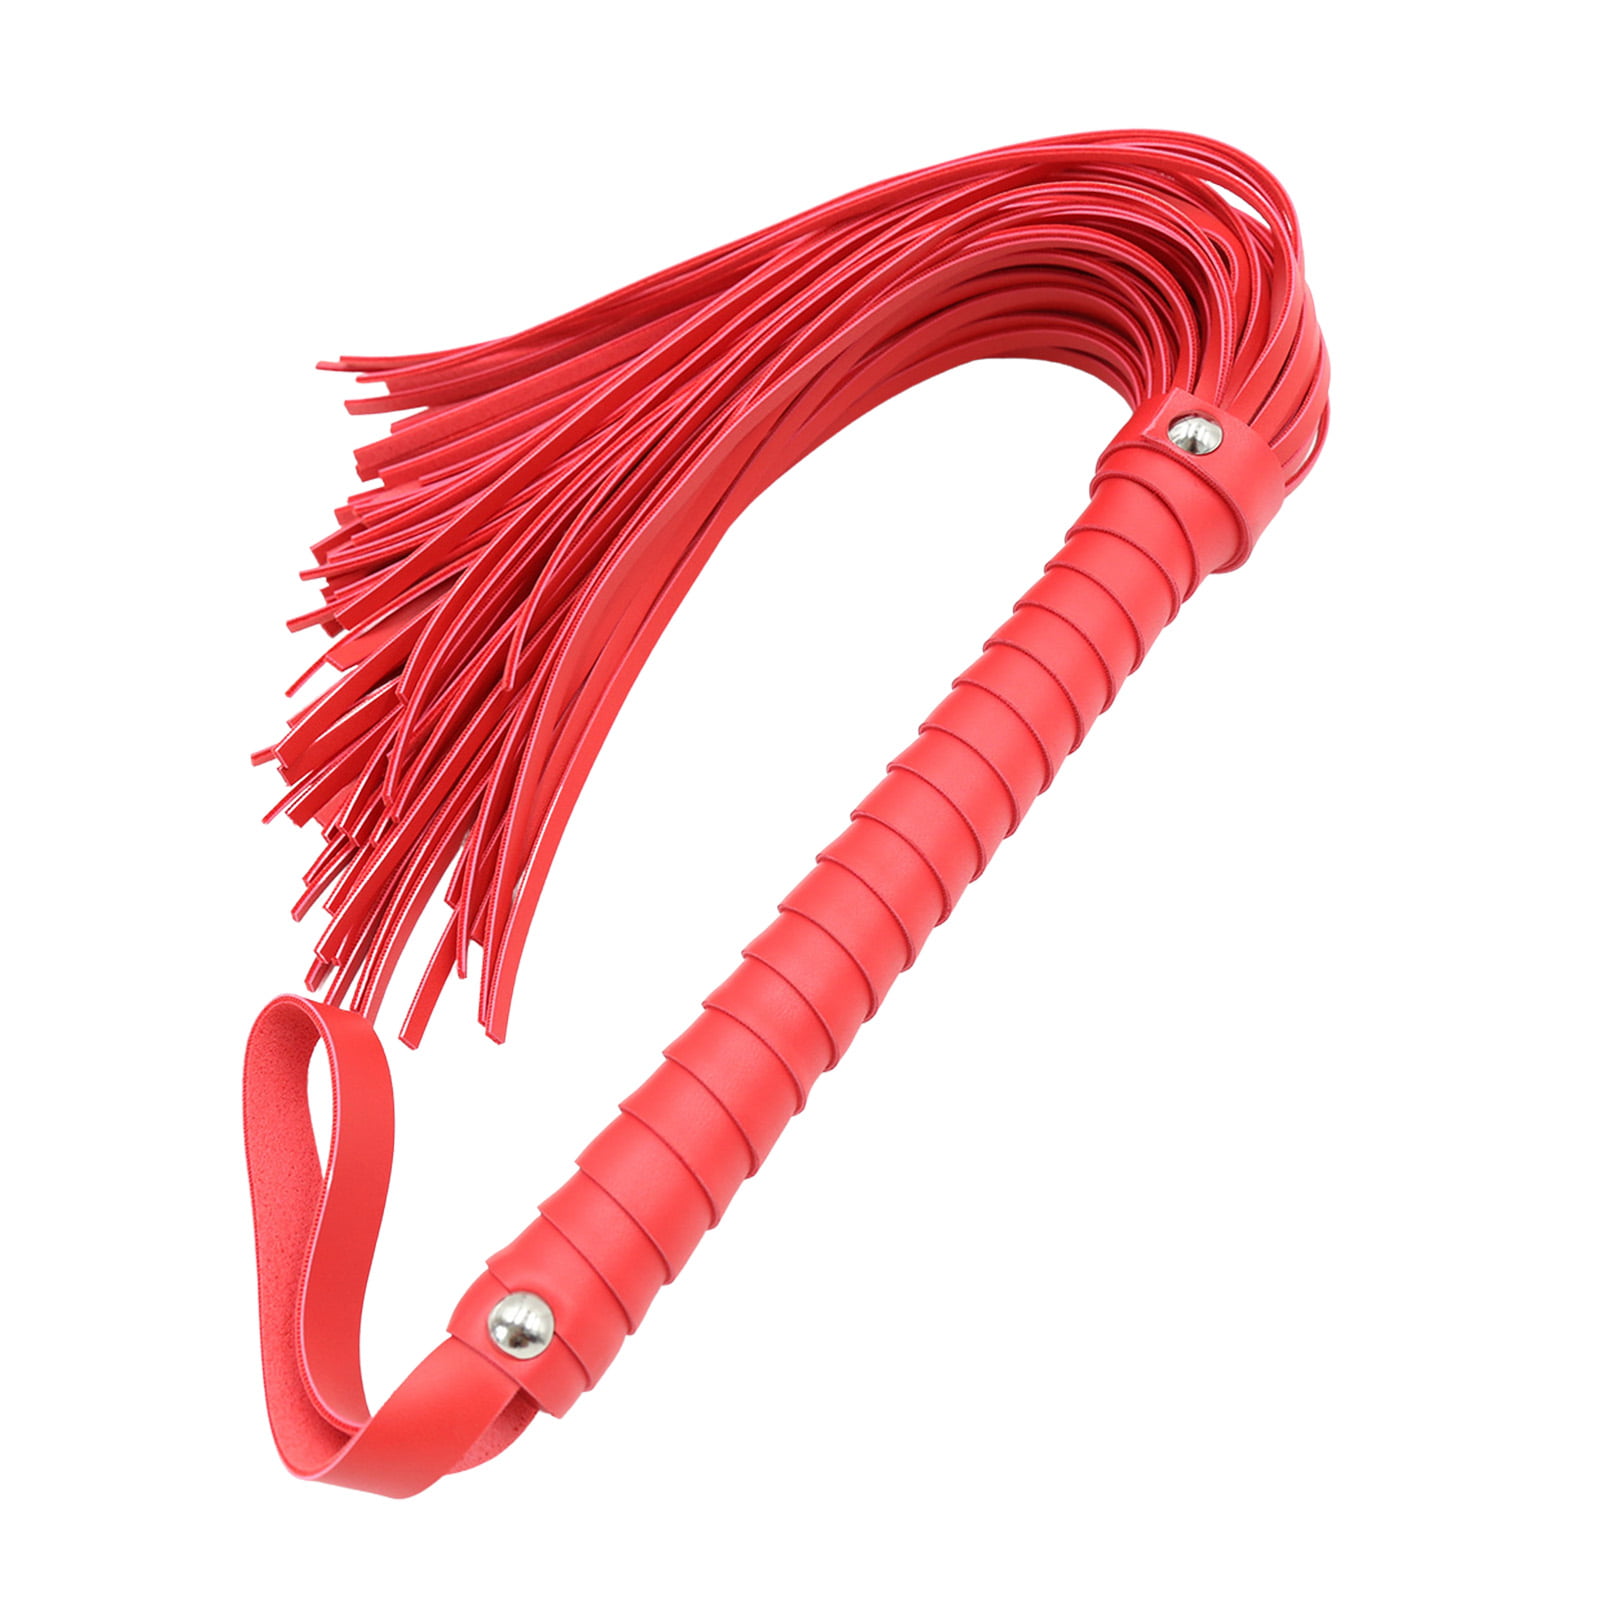 Horse Teaching Training Tool 23.5 Inches Horse Whip Clothing Accessories for Performance and Training Dreamseeker Outdoor Sports Riding Training Accessories 